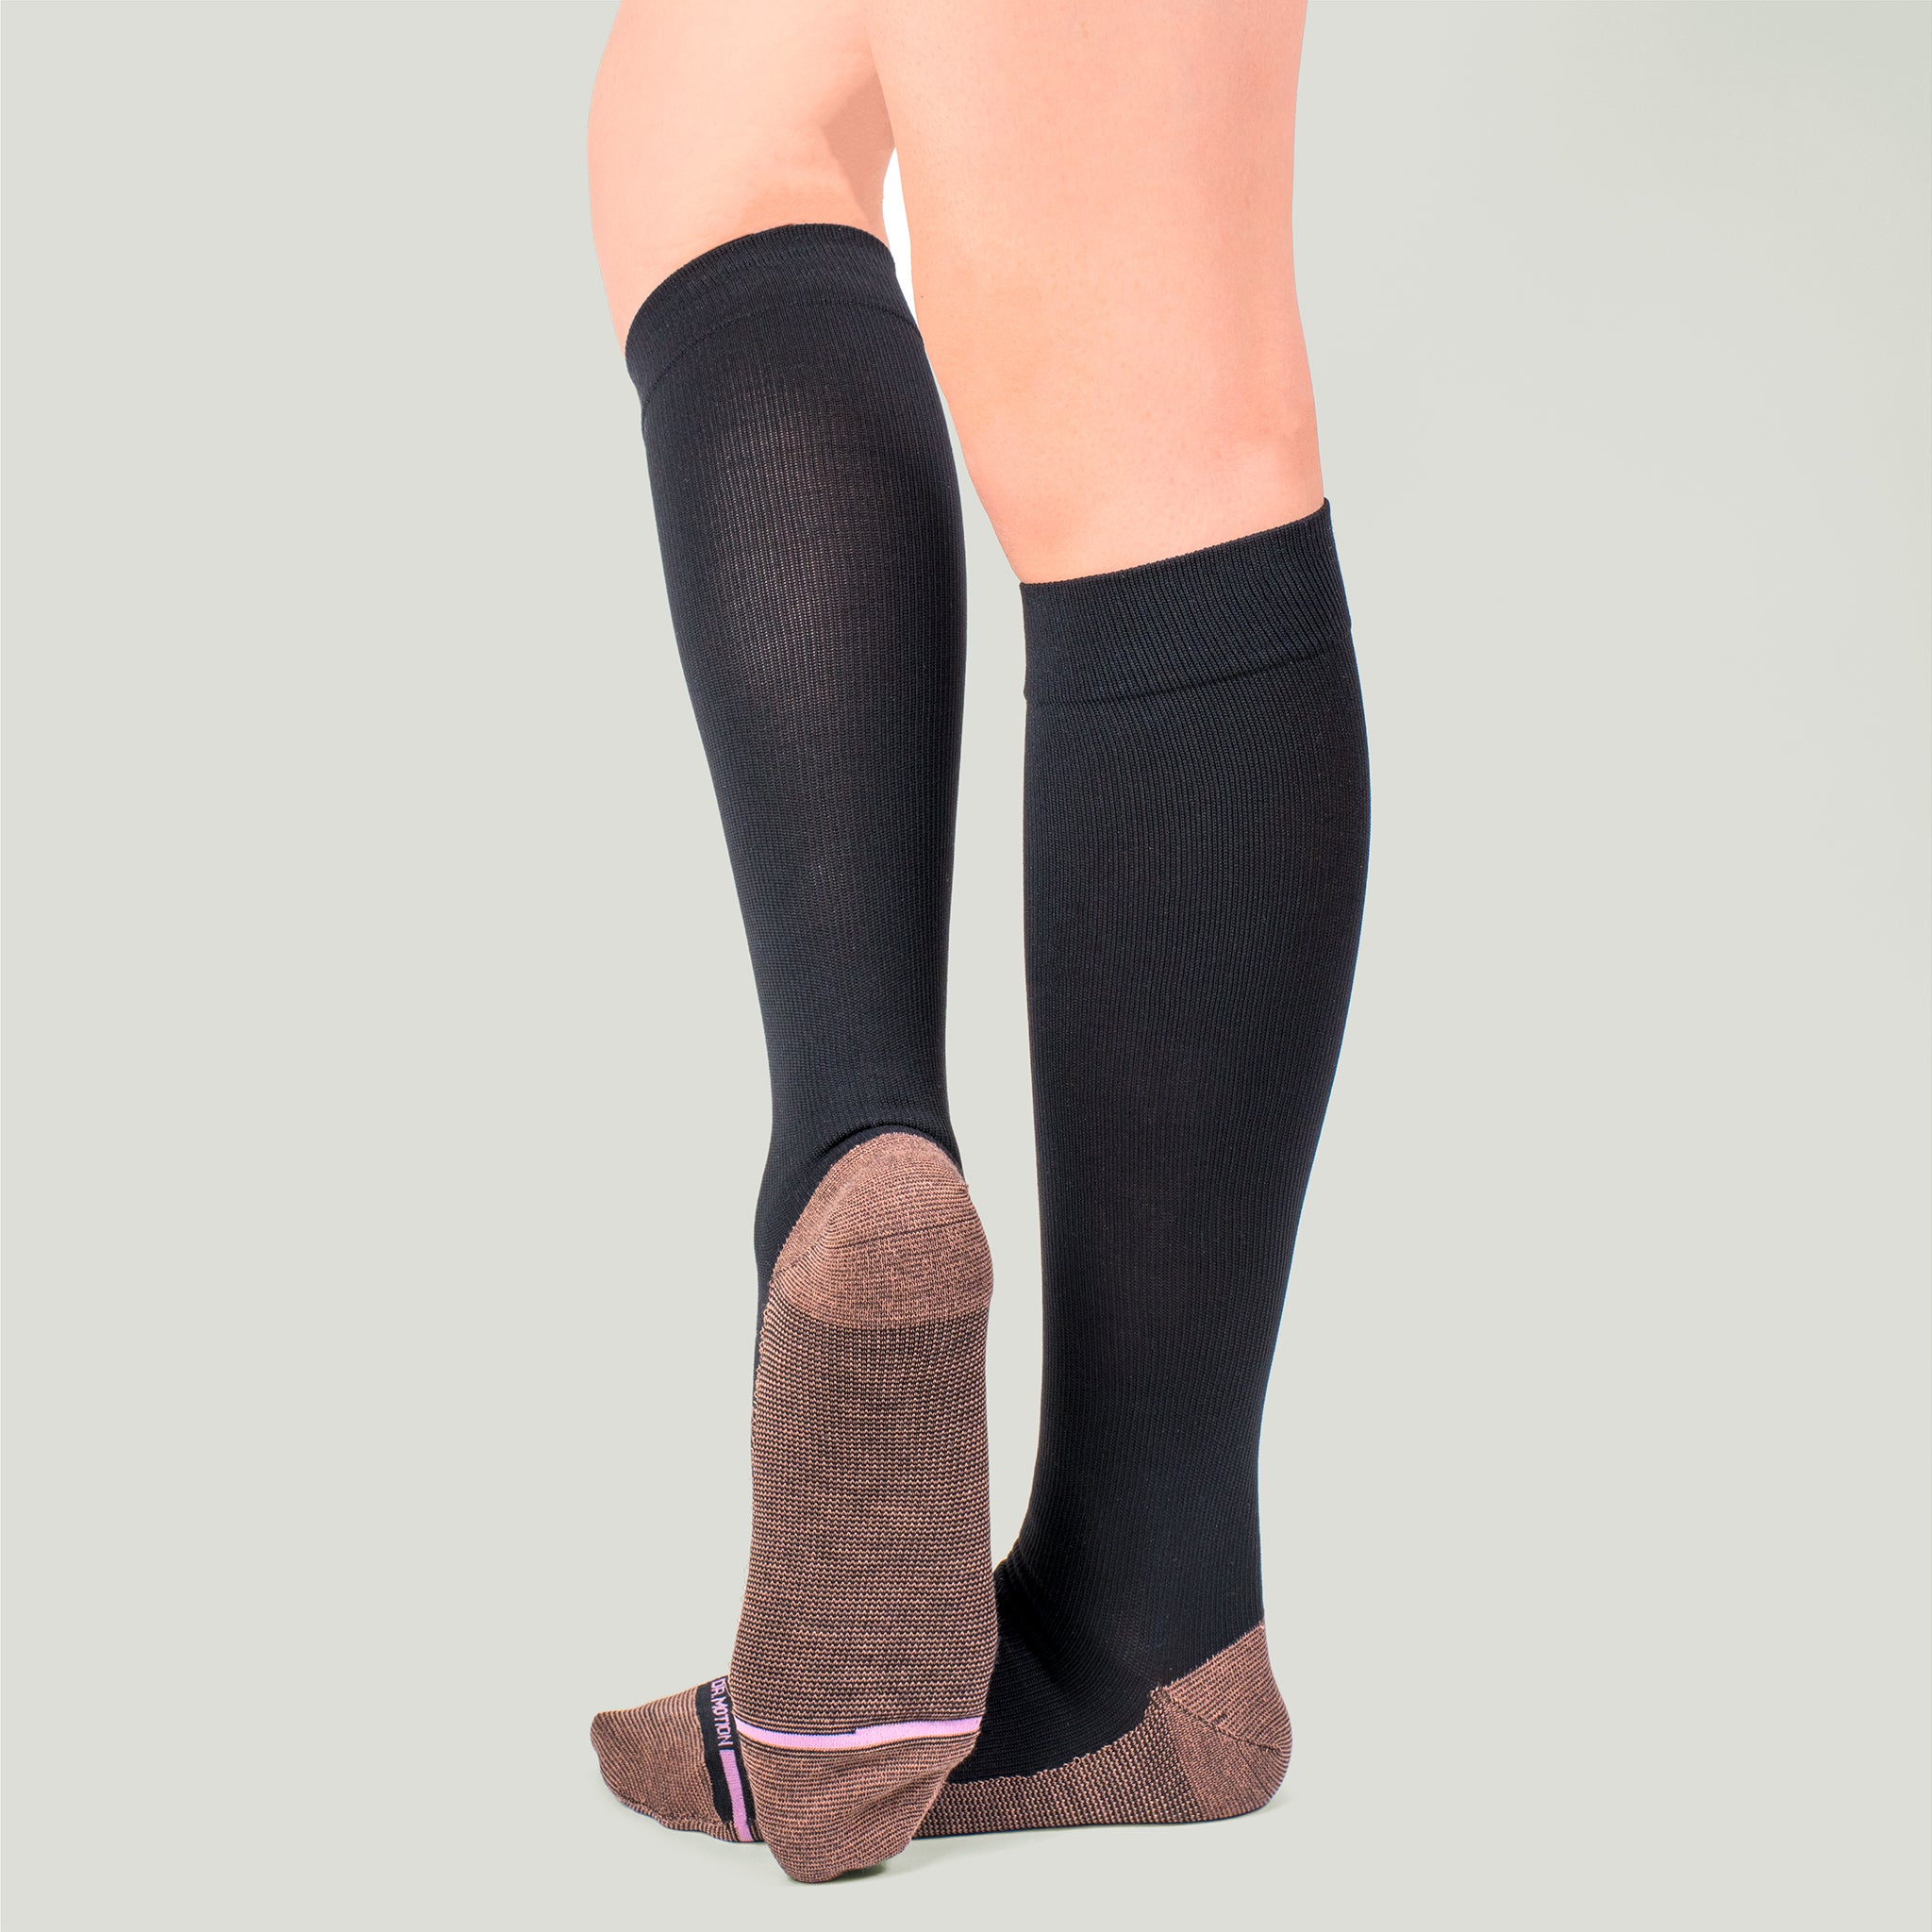 Dr Miracle's Anti-fatigue Copper-infused Compression Socks